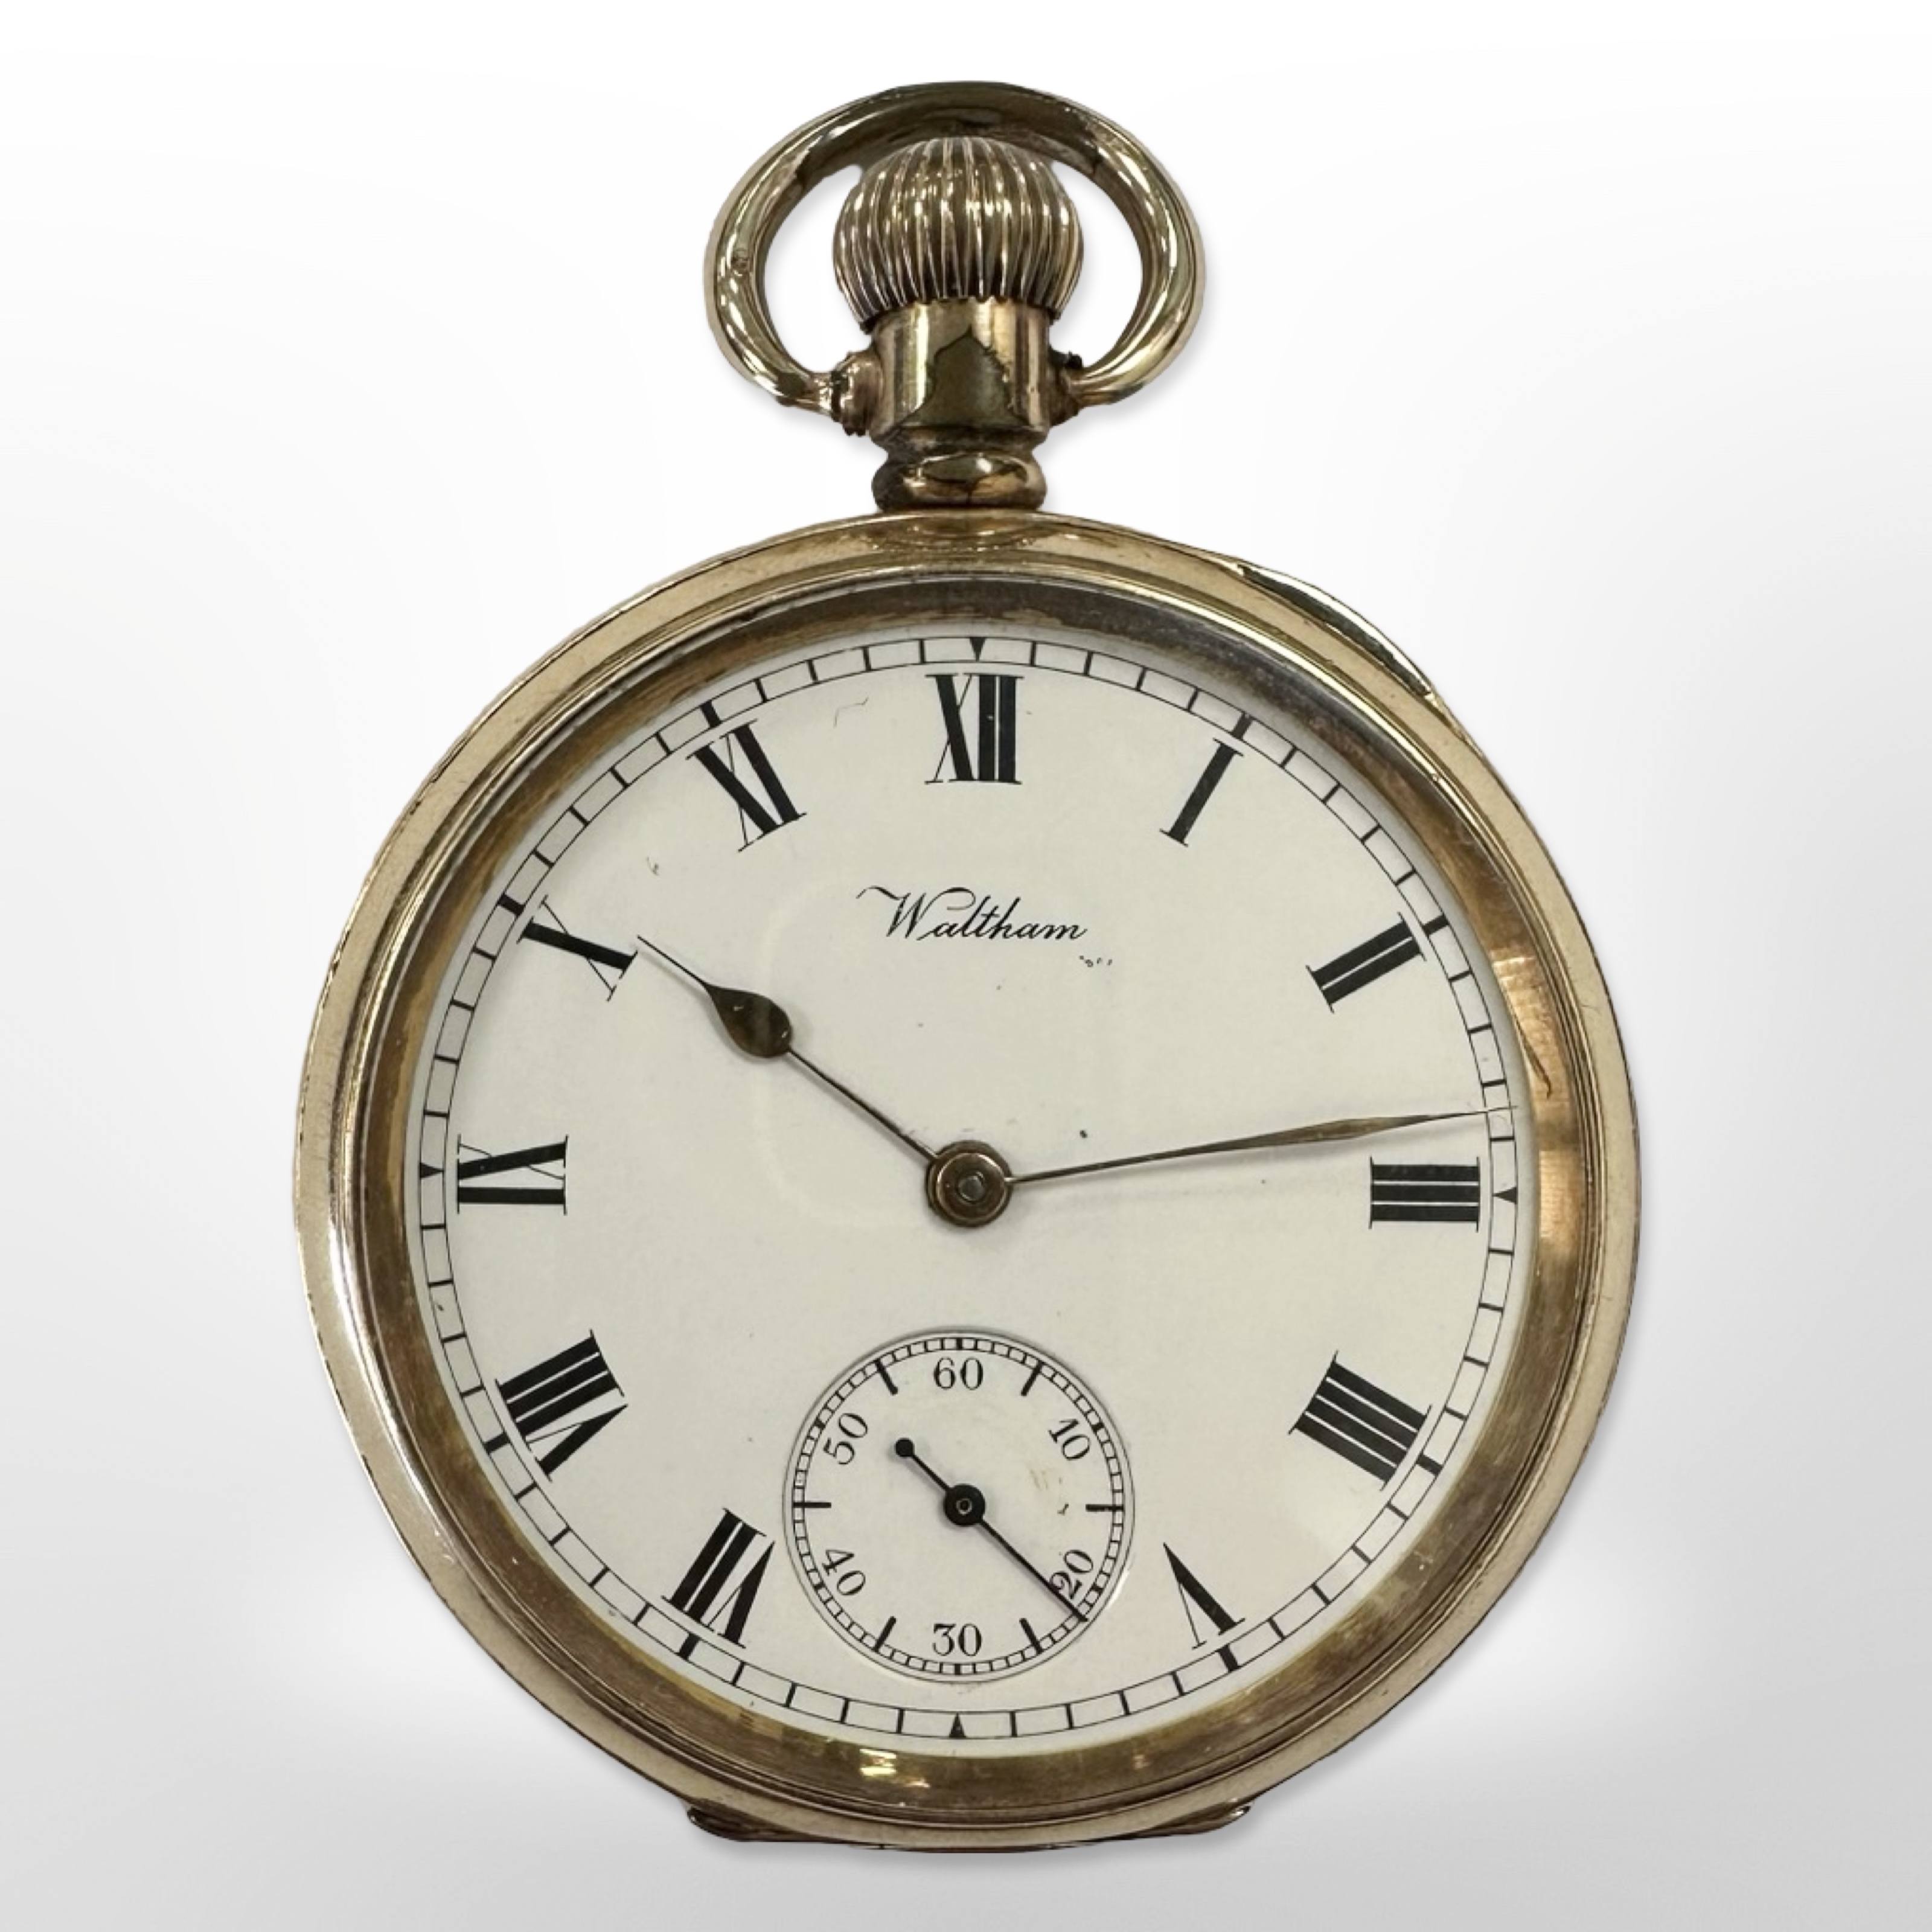 An American Waltham USA Traveller gold plated pocket watch, movement number 19,752,